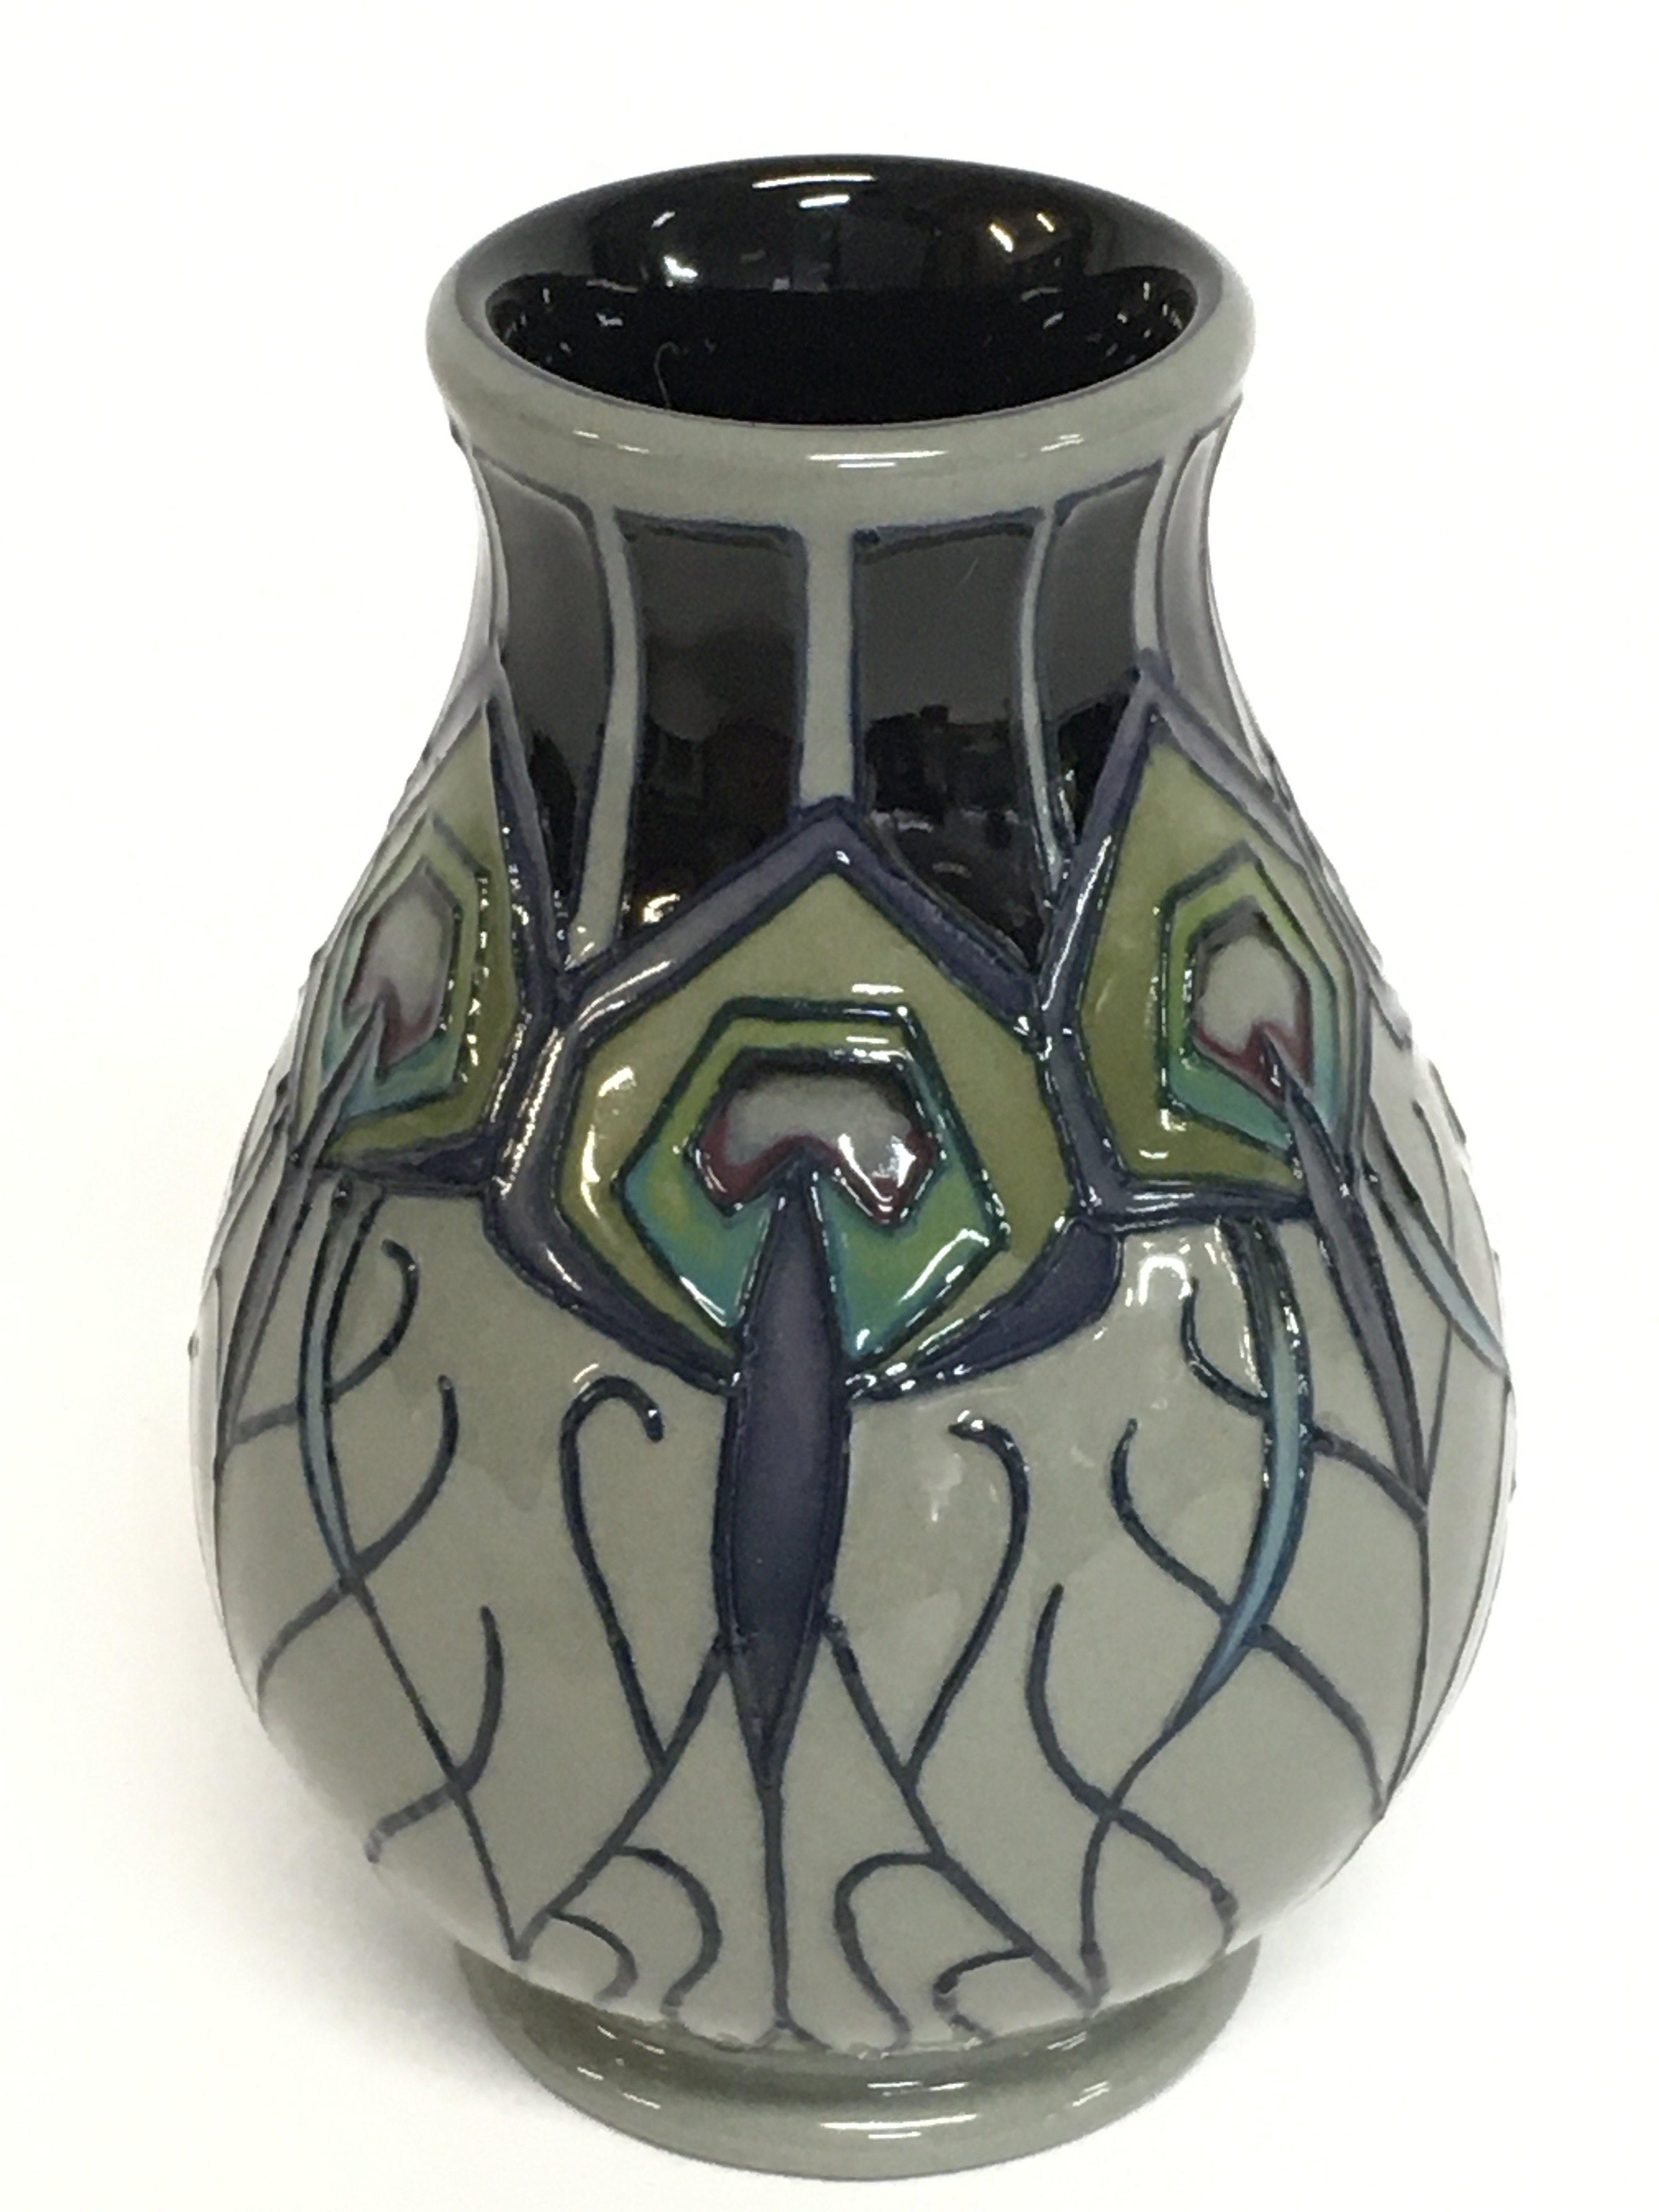 A Moorcroft vase, 10cm tall. No obvious damage or